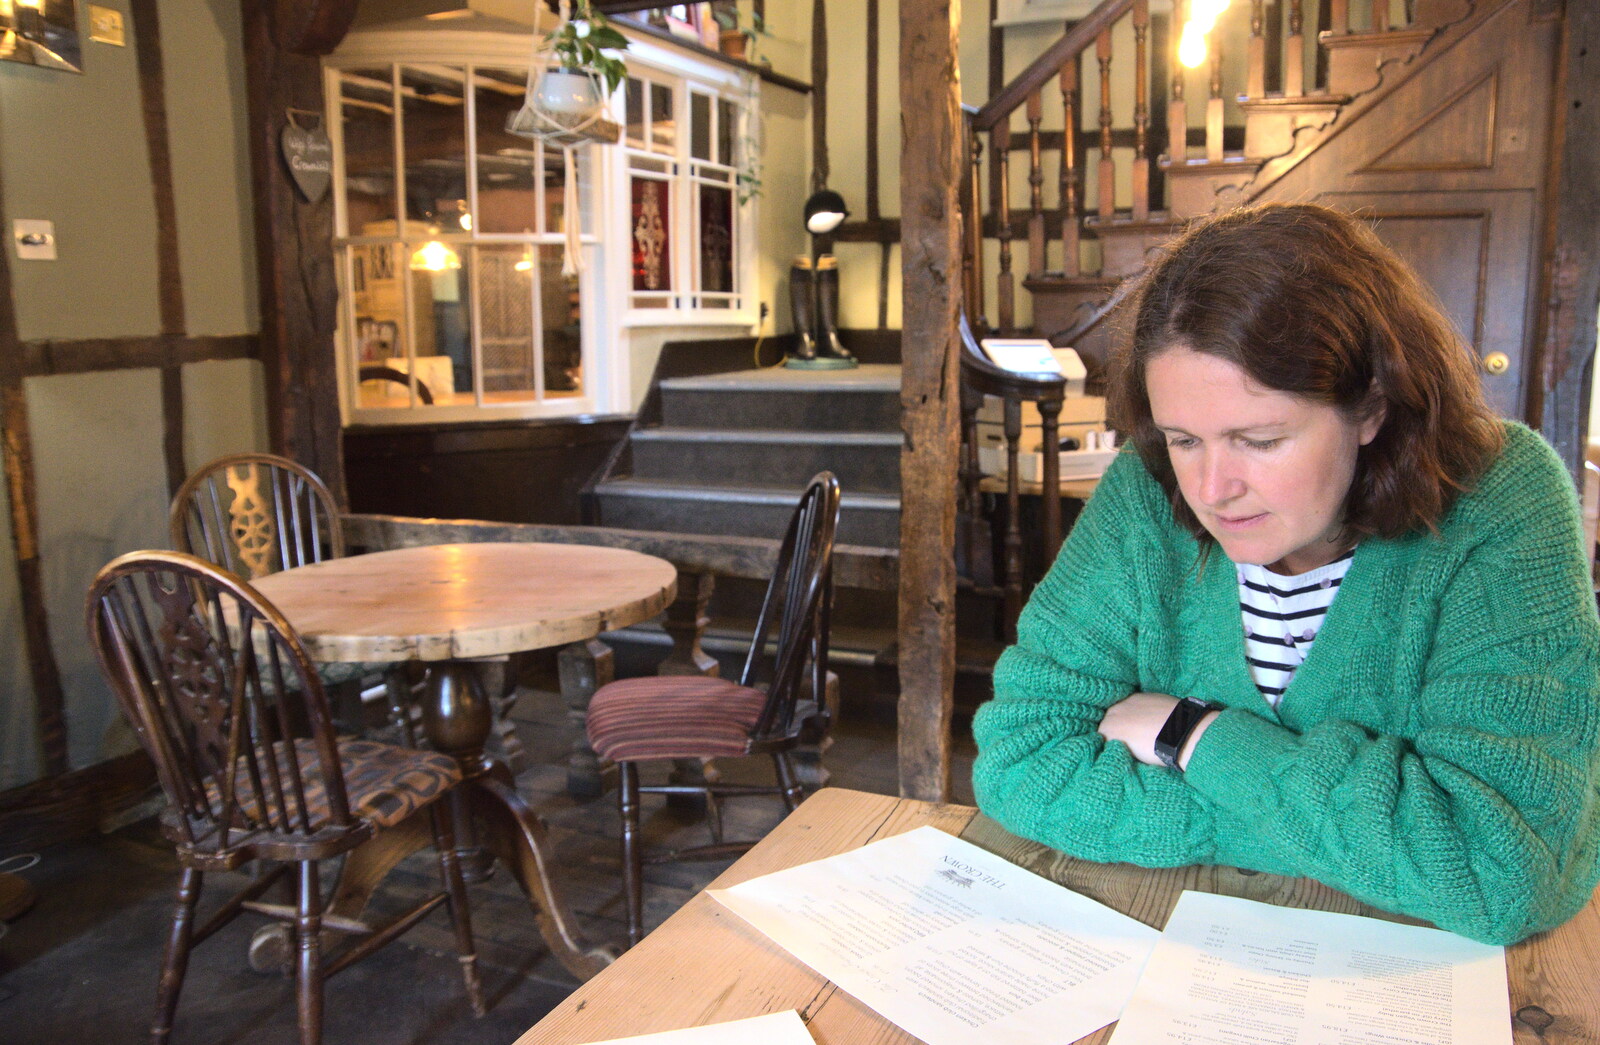 Isobel scopes out the menu in the Crown from On the Beach at Sea Palling, Norfolk - 8th May 2022